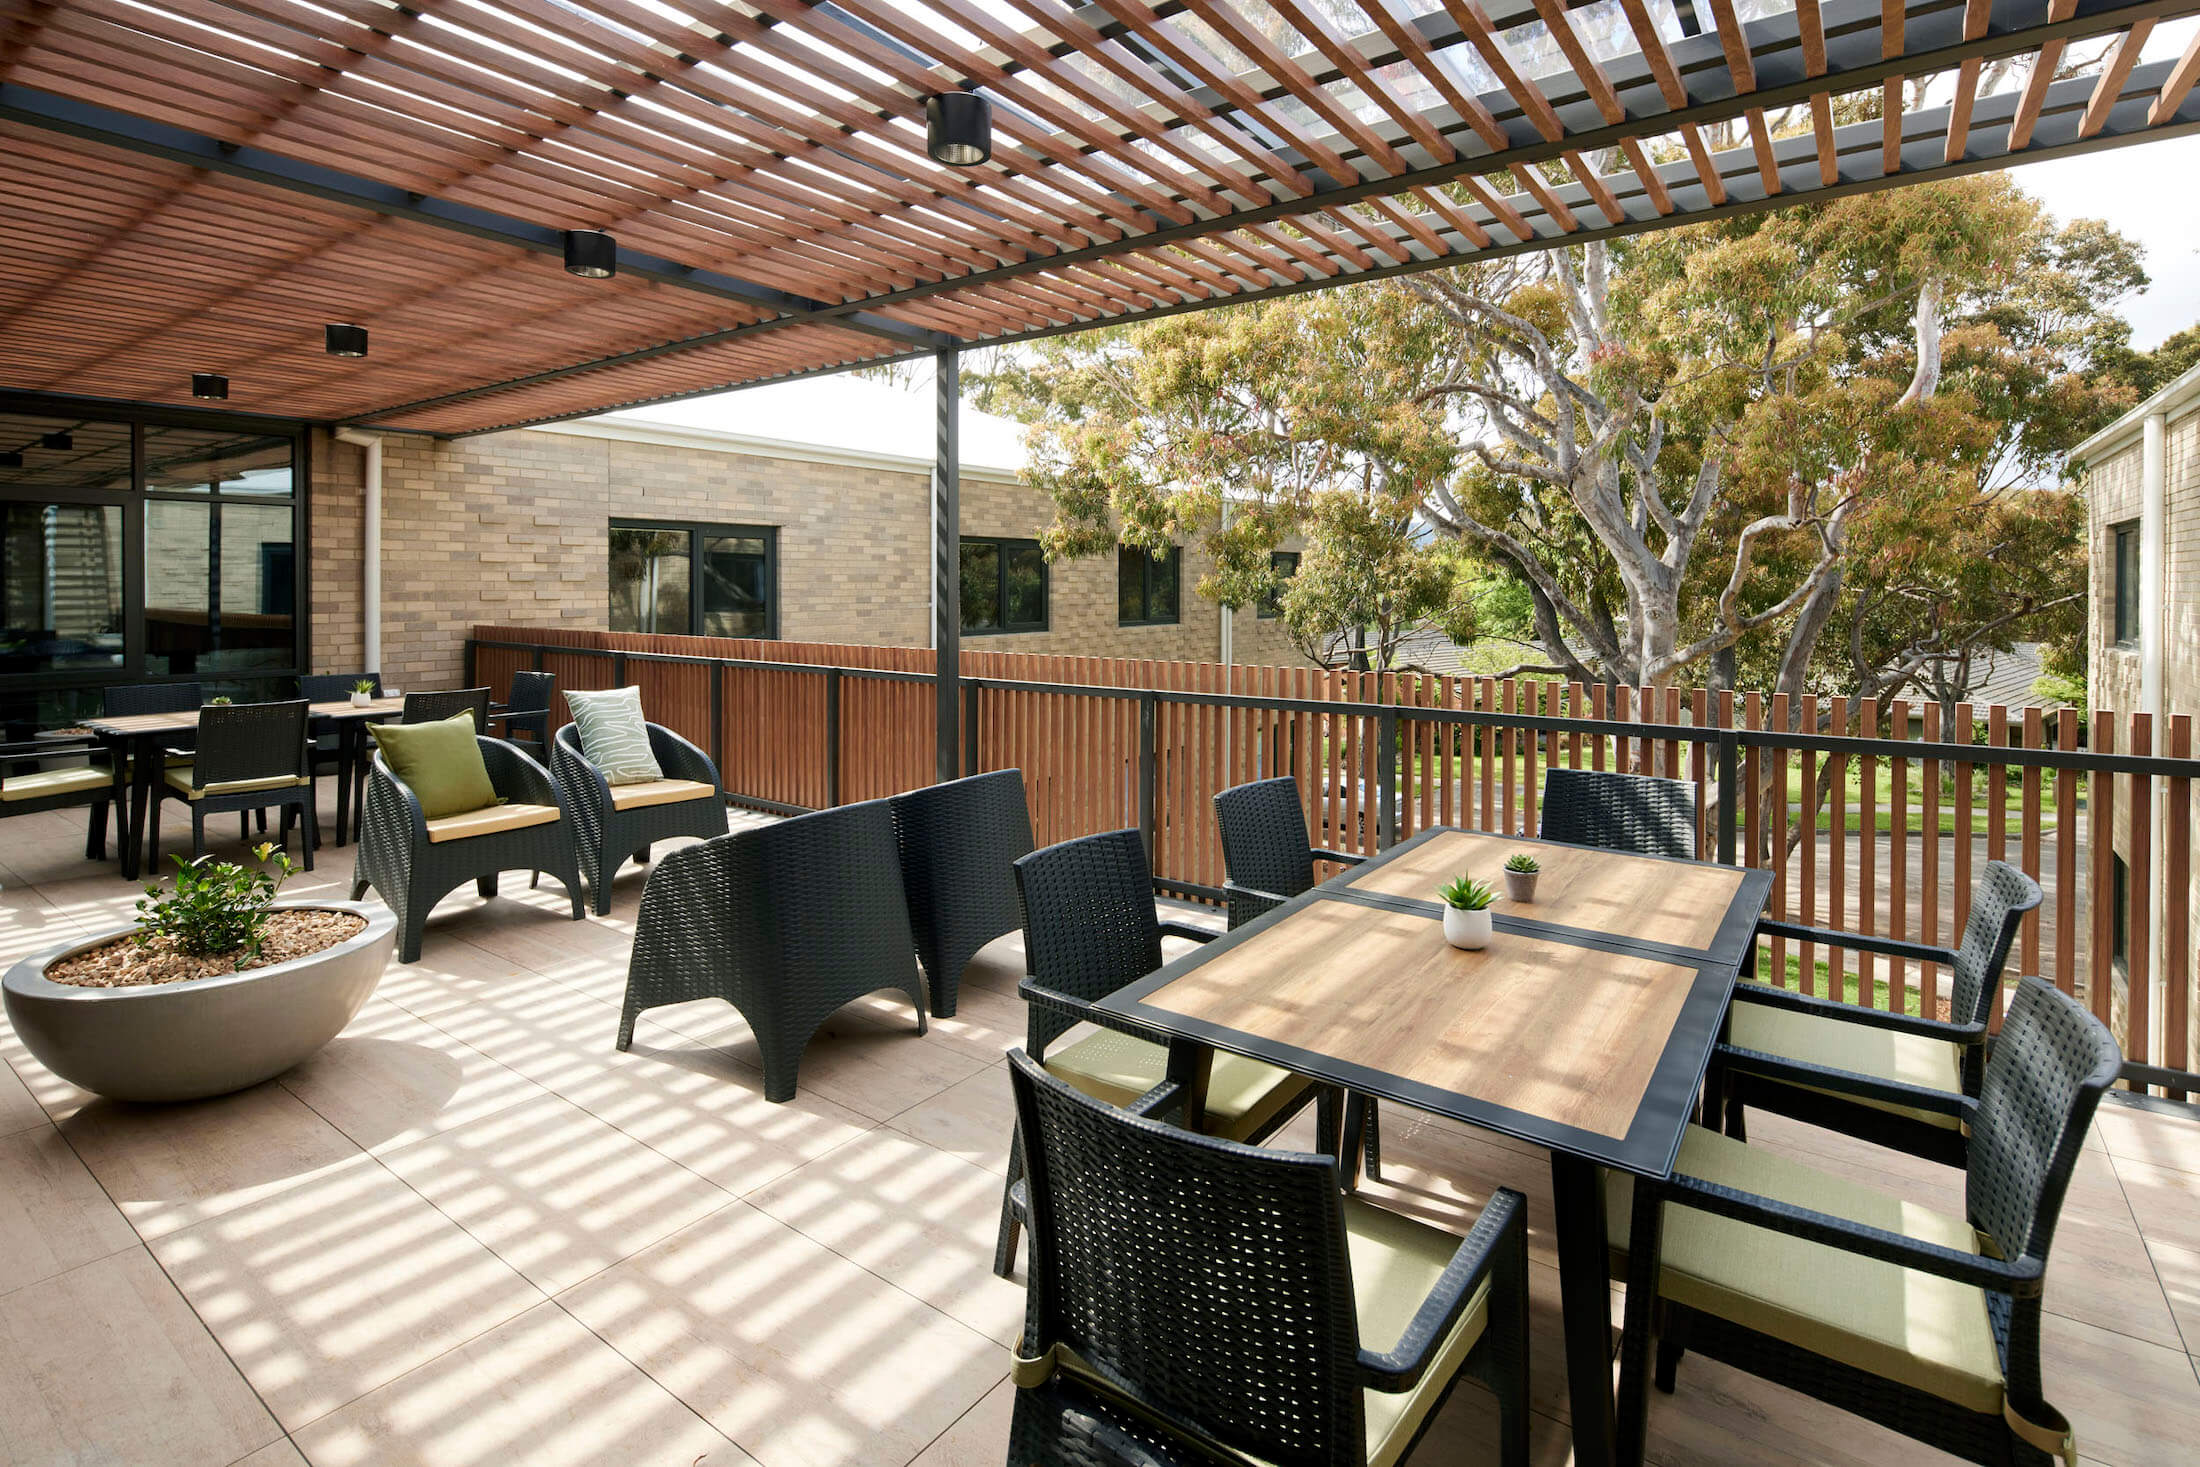 Raised outdoor patio with slatted timber shade cover throwing dappled shade on dining and lounge settings, large gum tree beyond